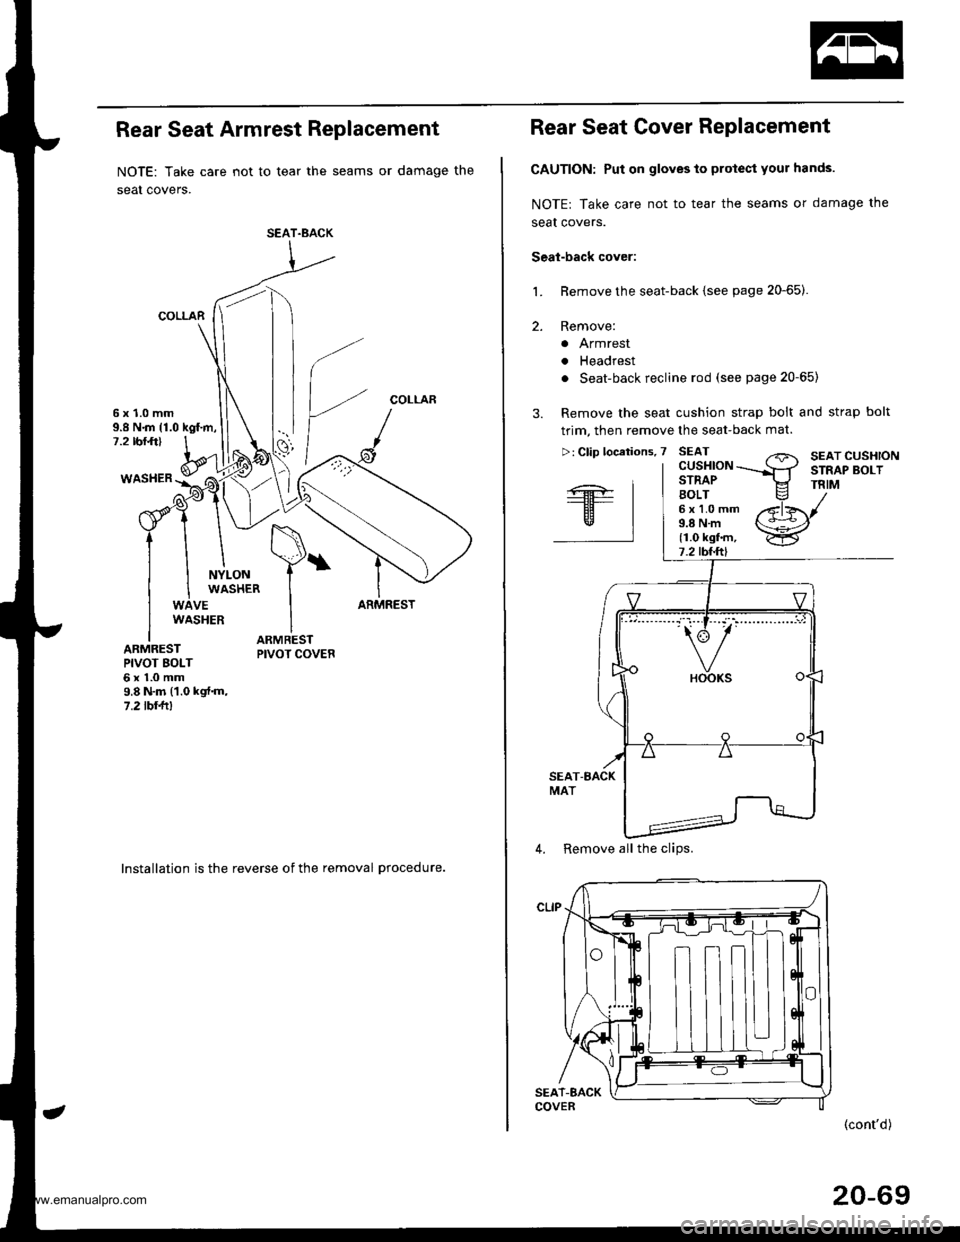 HONDA CR-V 1999 RD1-RD3 / 1.G Workshop Manual 
Rear Seat Armrest Replacement
NOTE: Take care not to tear the seams or damage the
seat covers.
COLLAR
COLLAR6x1.0mm9.8 N.m {1.0 kgf.m,7.2 rbr.ft)
WASHER
NYLONWASHER
VEARMRESTWASHER
ARMRESTPIVOT BOLT6